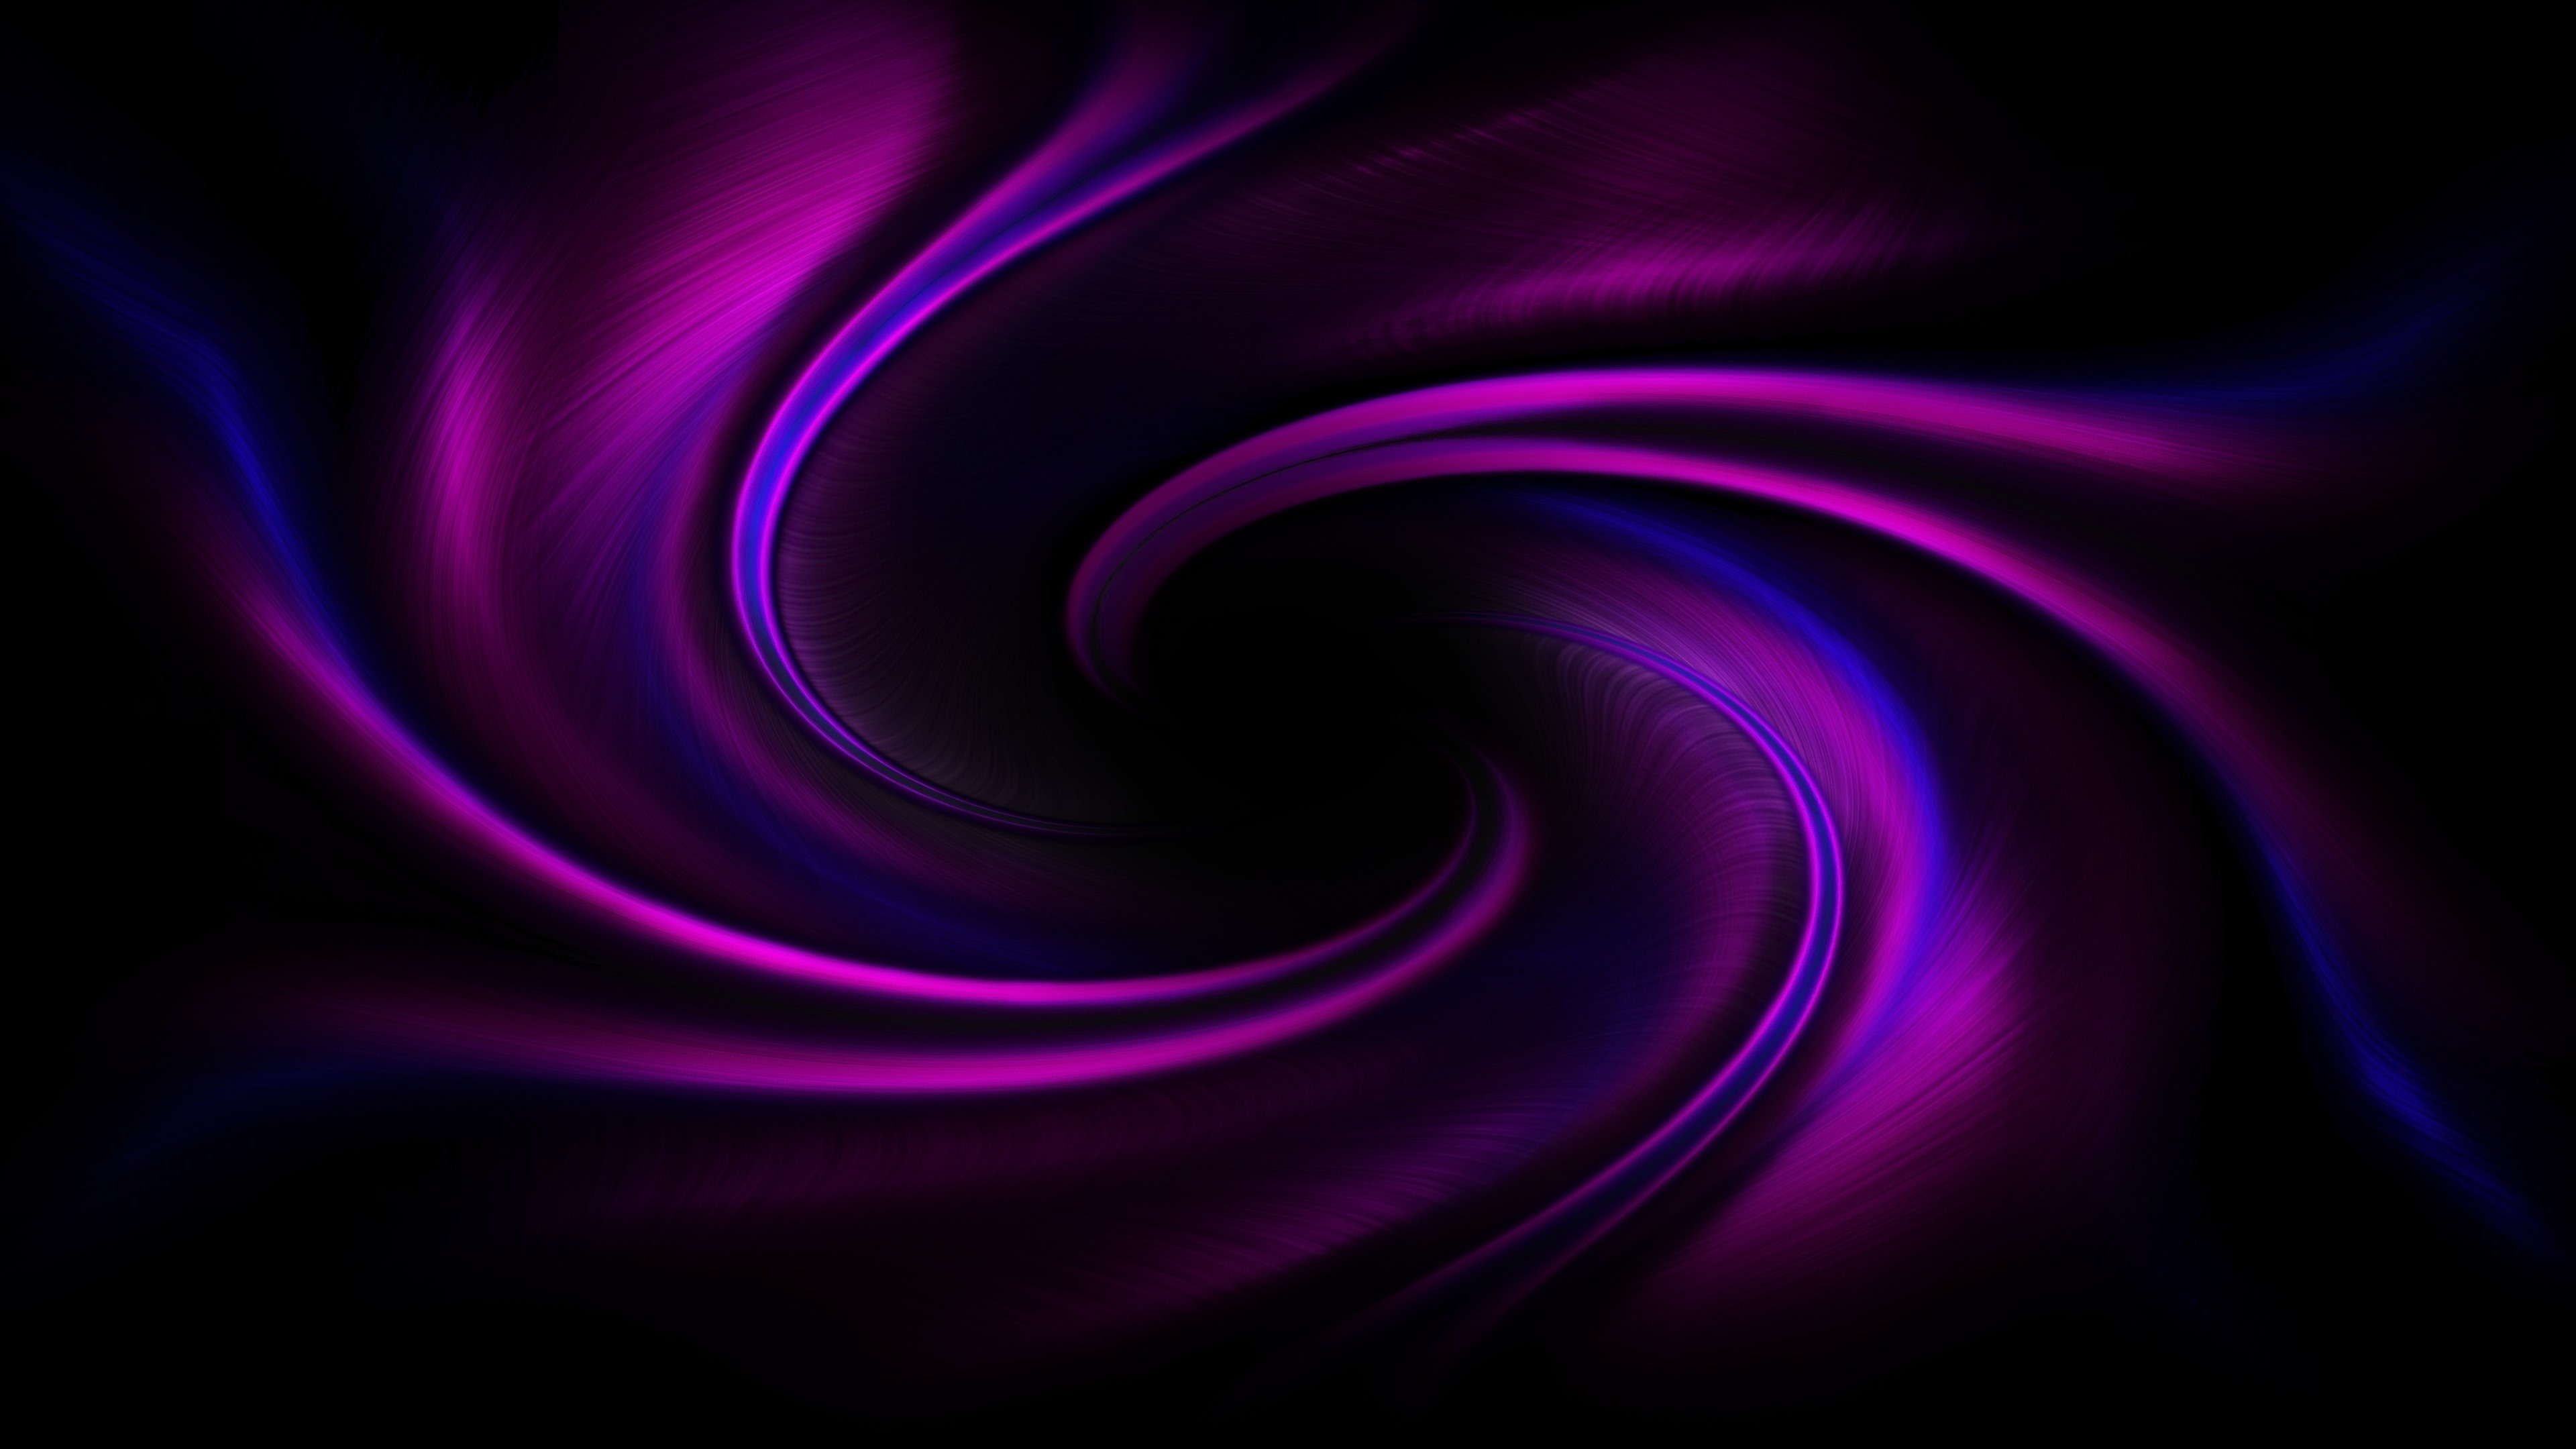 Purple and Black Abstract Painting Laptop Wallpaper in 1366x